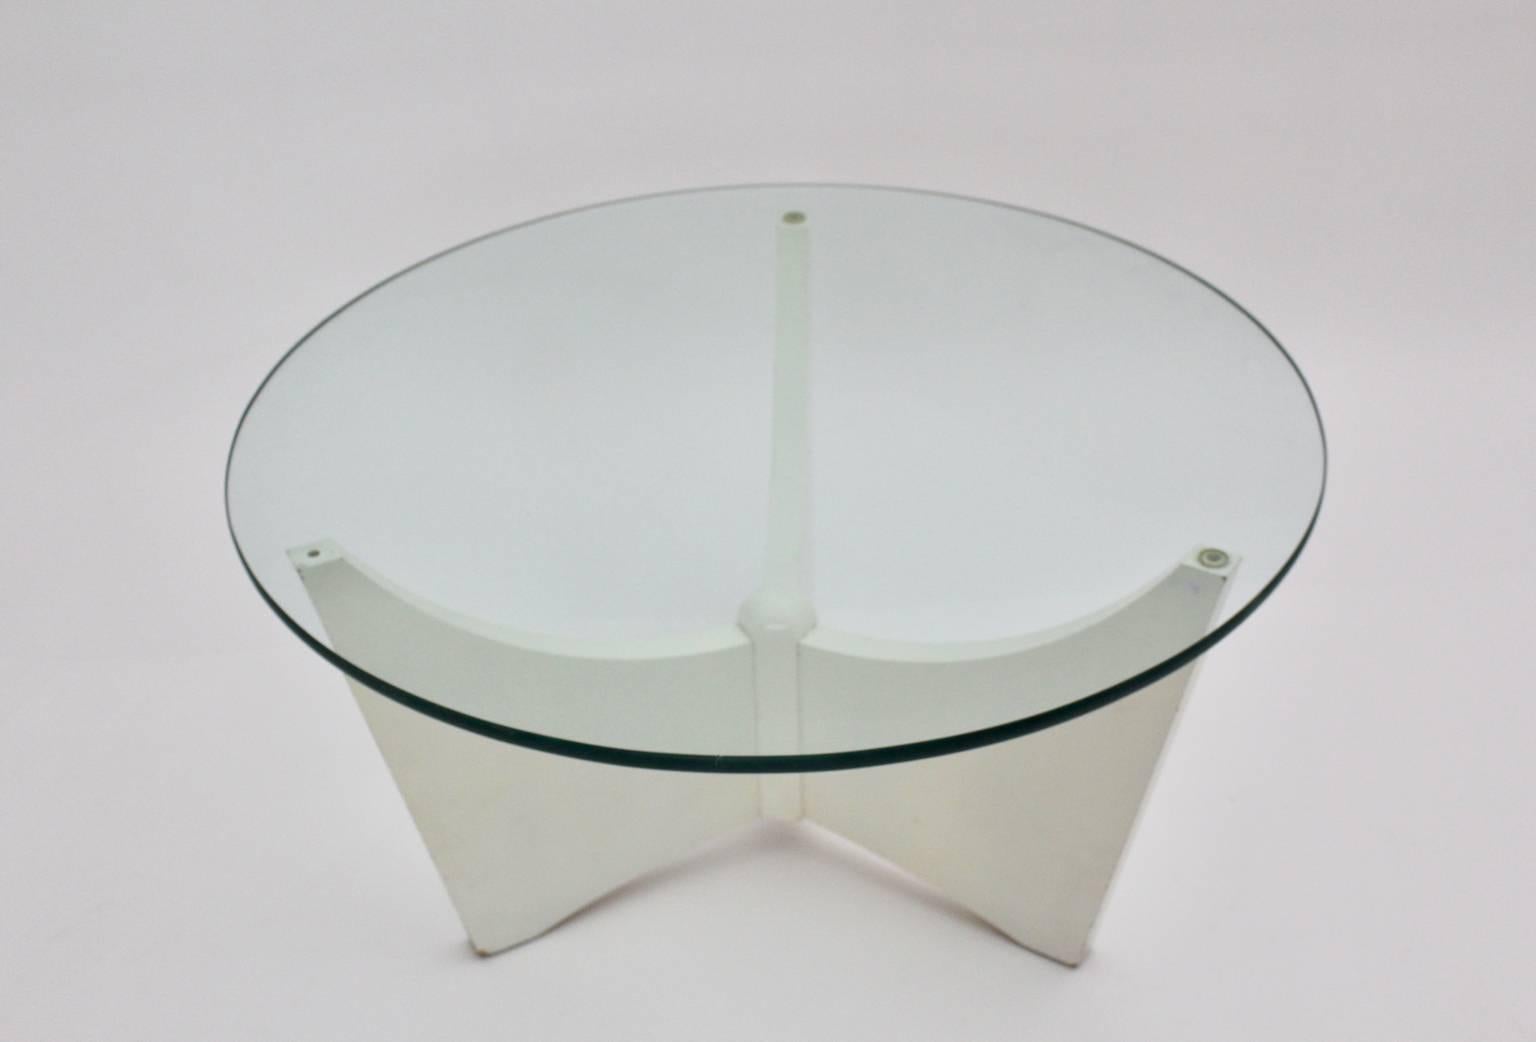 Space age vintage coffee table, which features wooden legs set in a tripod shape and painted in white, while holding a glass plate in a typical 1970s style. The glass top has a thickness of 1.4 cm and has some small scratches.
all measures are